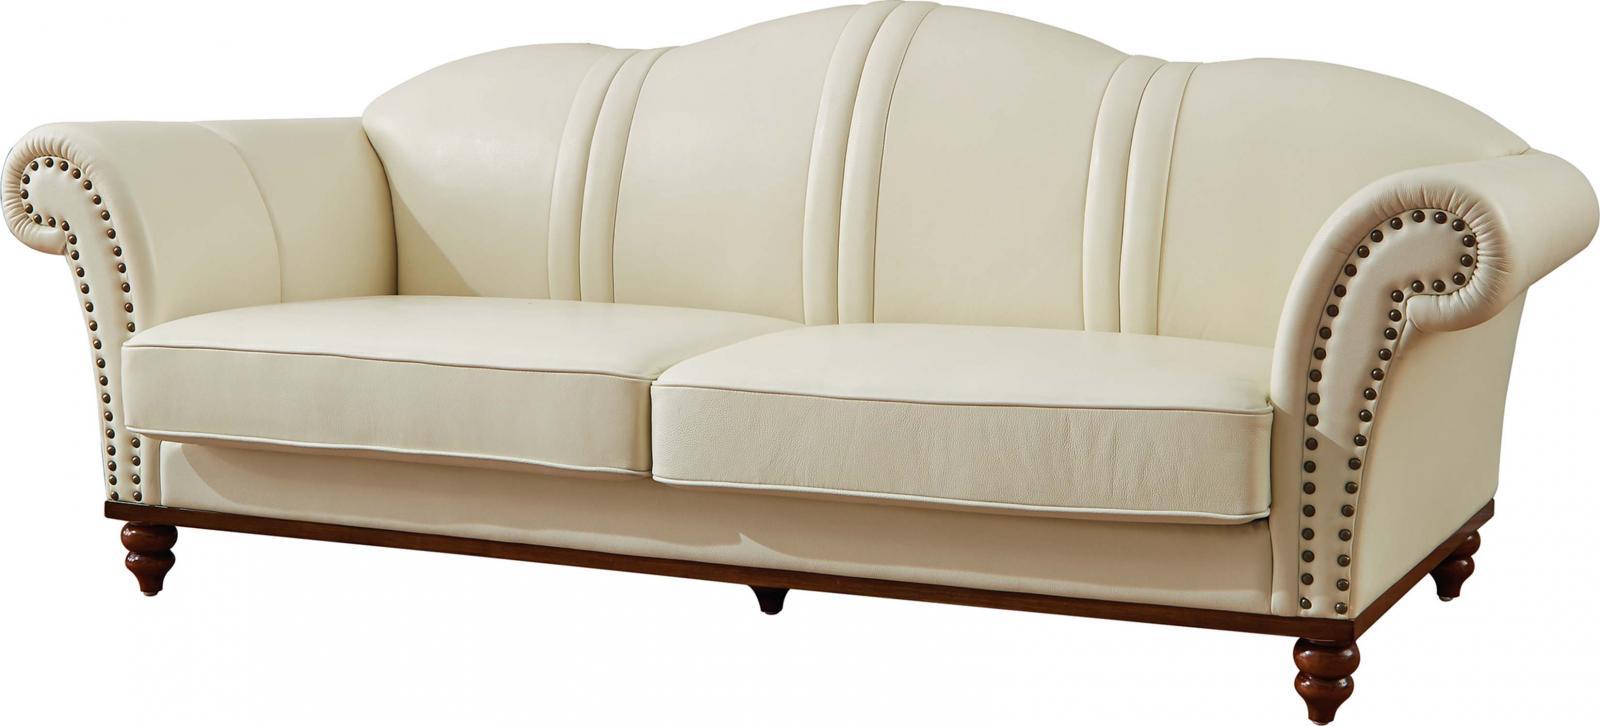 

    
ESF 2601 Ivory Italian Leather Living Room Sofa Set 2Pcs Modern Made in Italy
